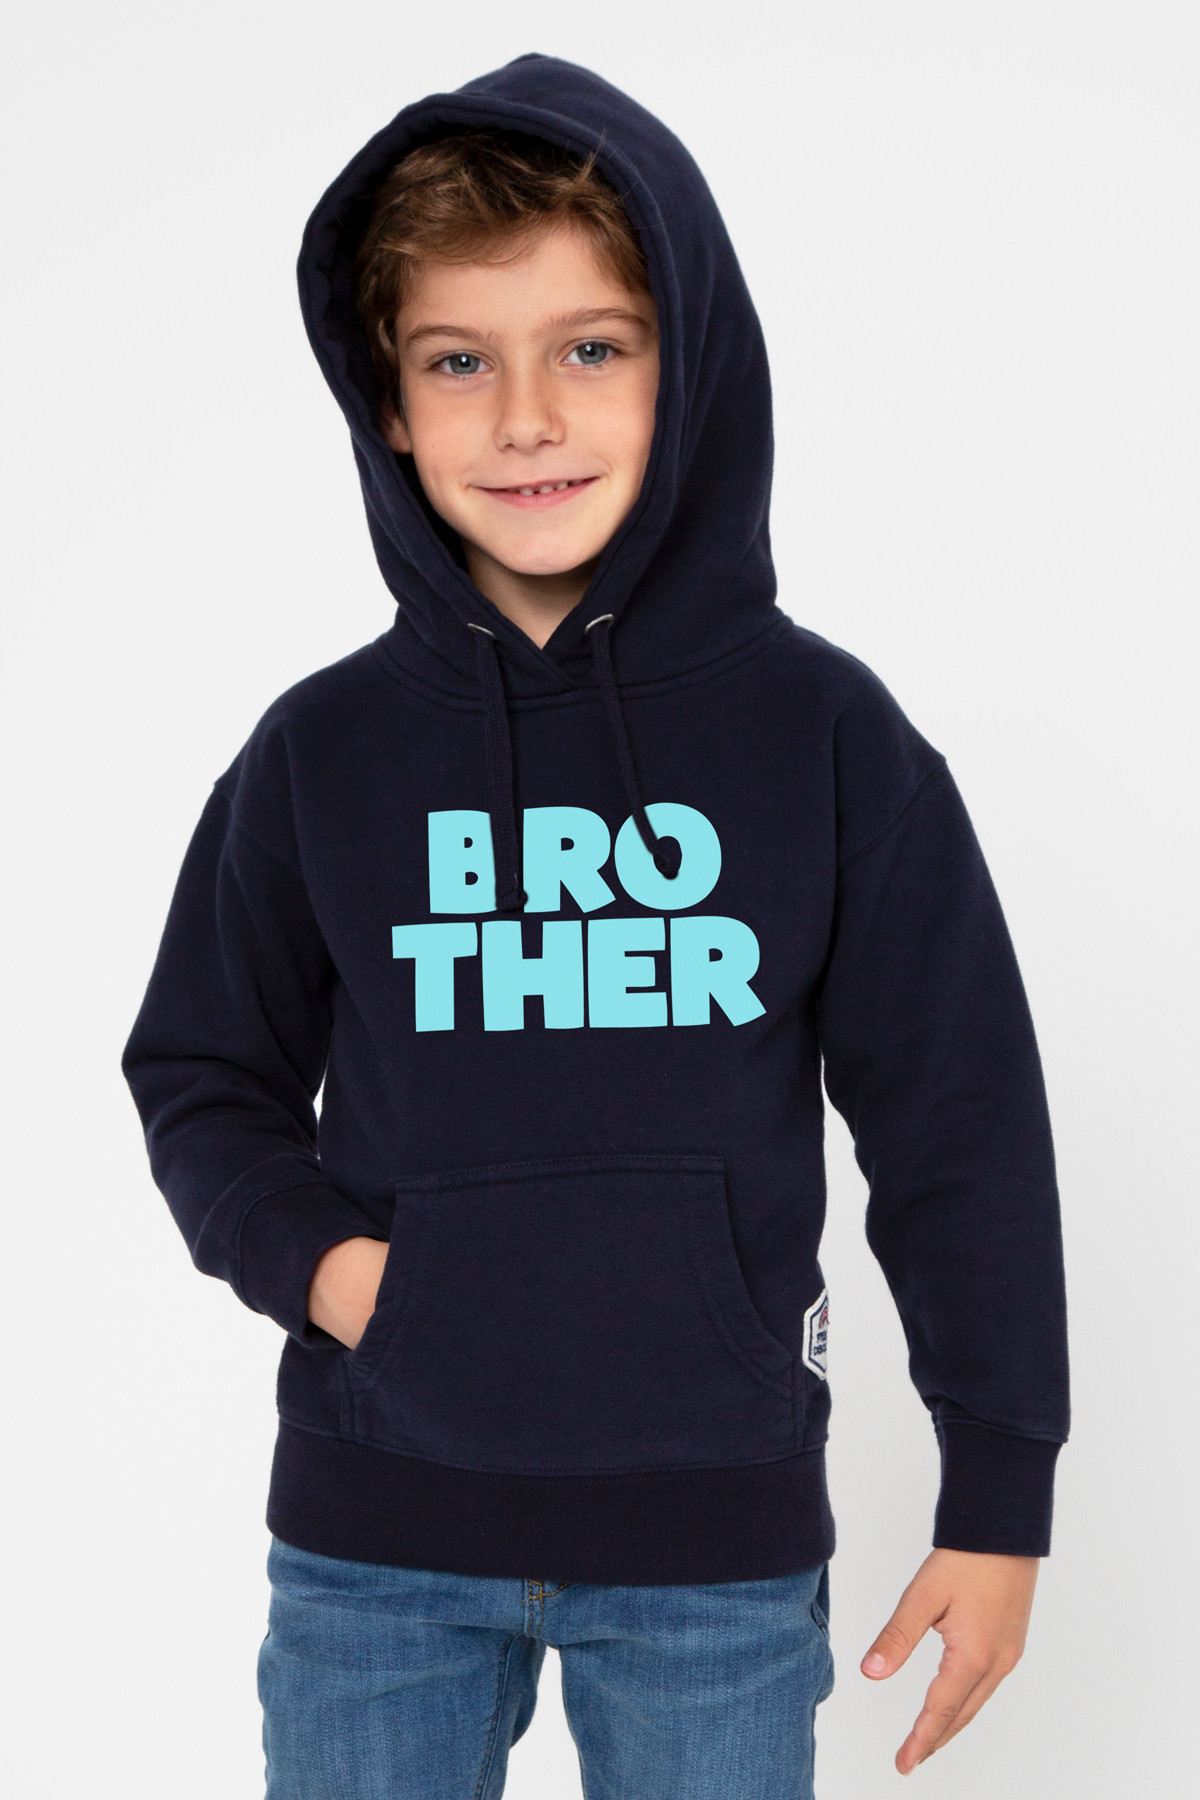 Photo de SWEATS À CAPUCHE Hoodie Kids BROTHER chez French Disorder